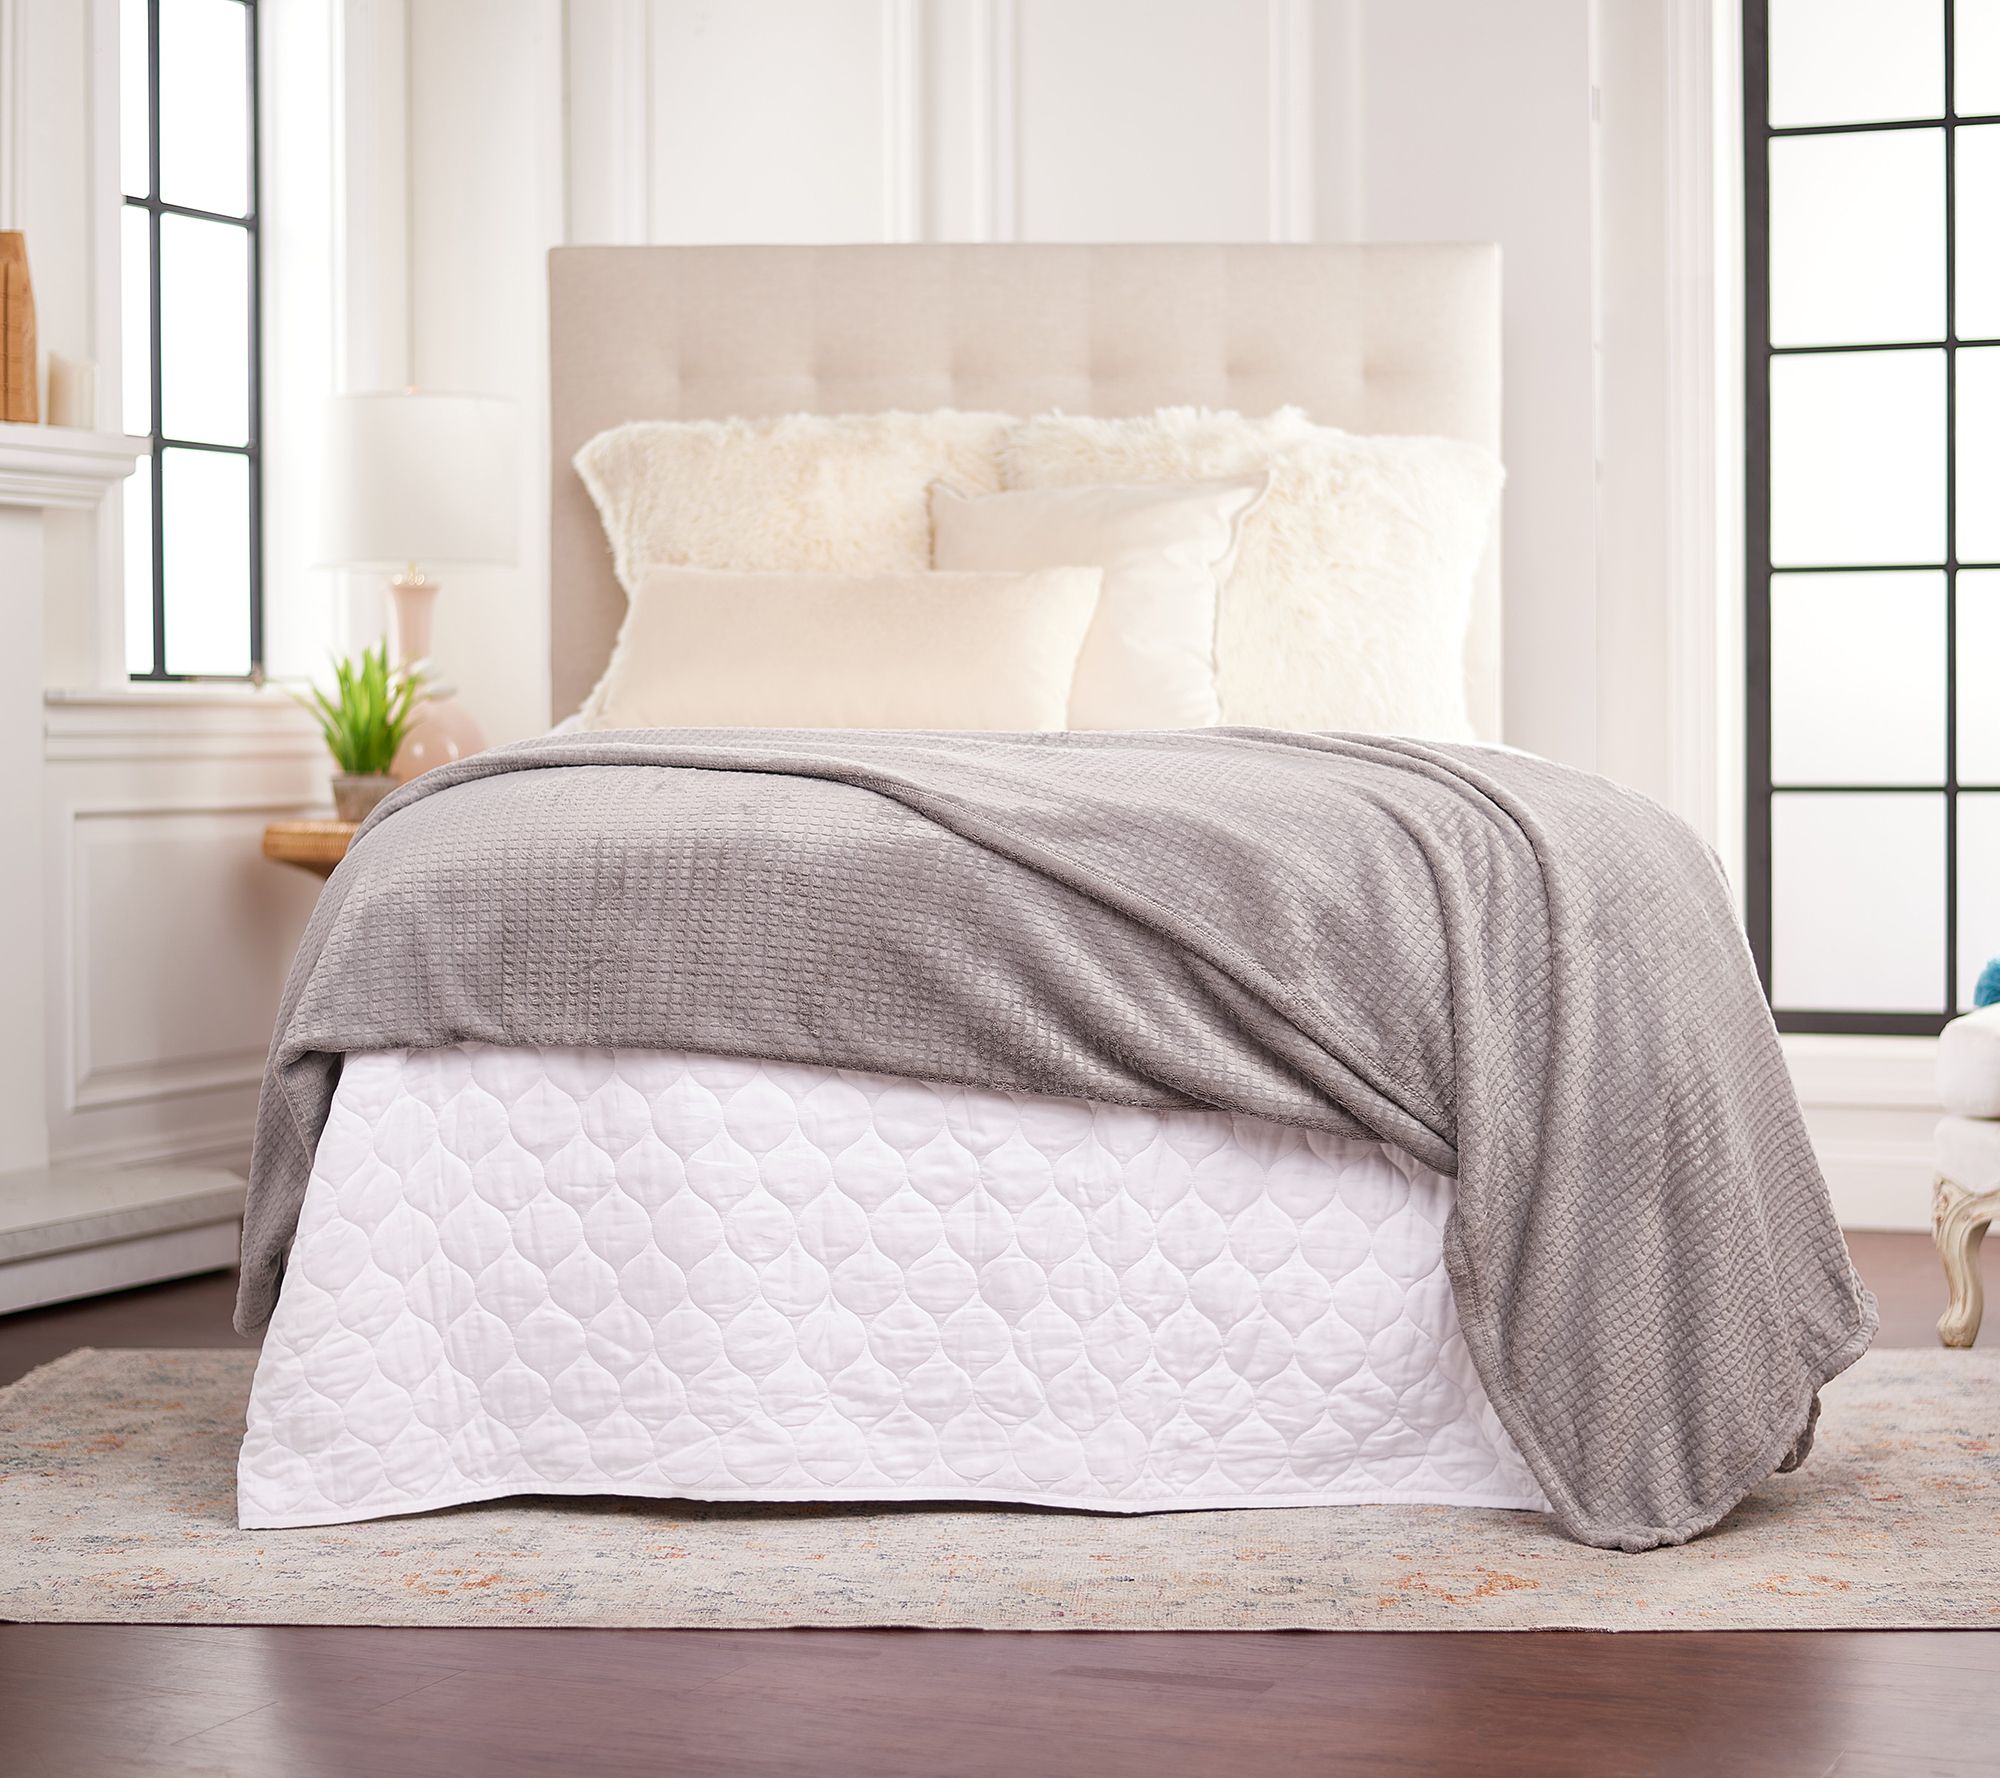 DayDream Embossed Waffle Blanket from Berkshire - Full - QVC.com